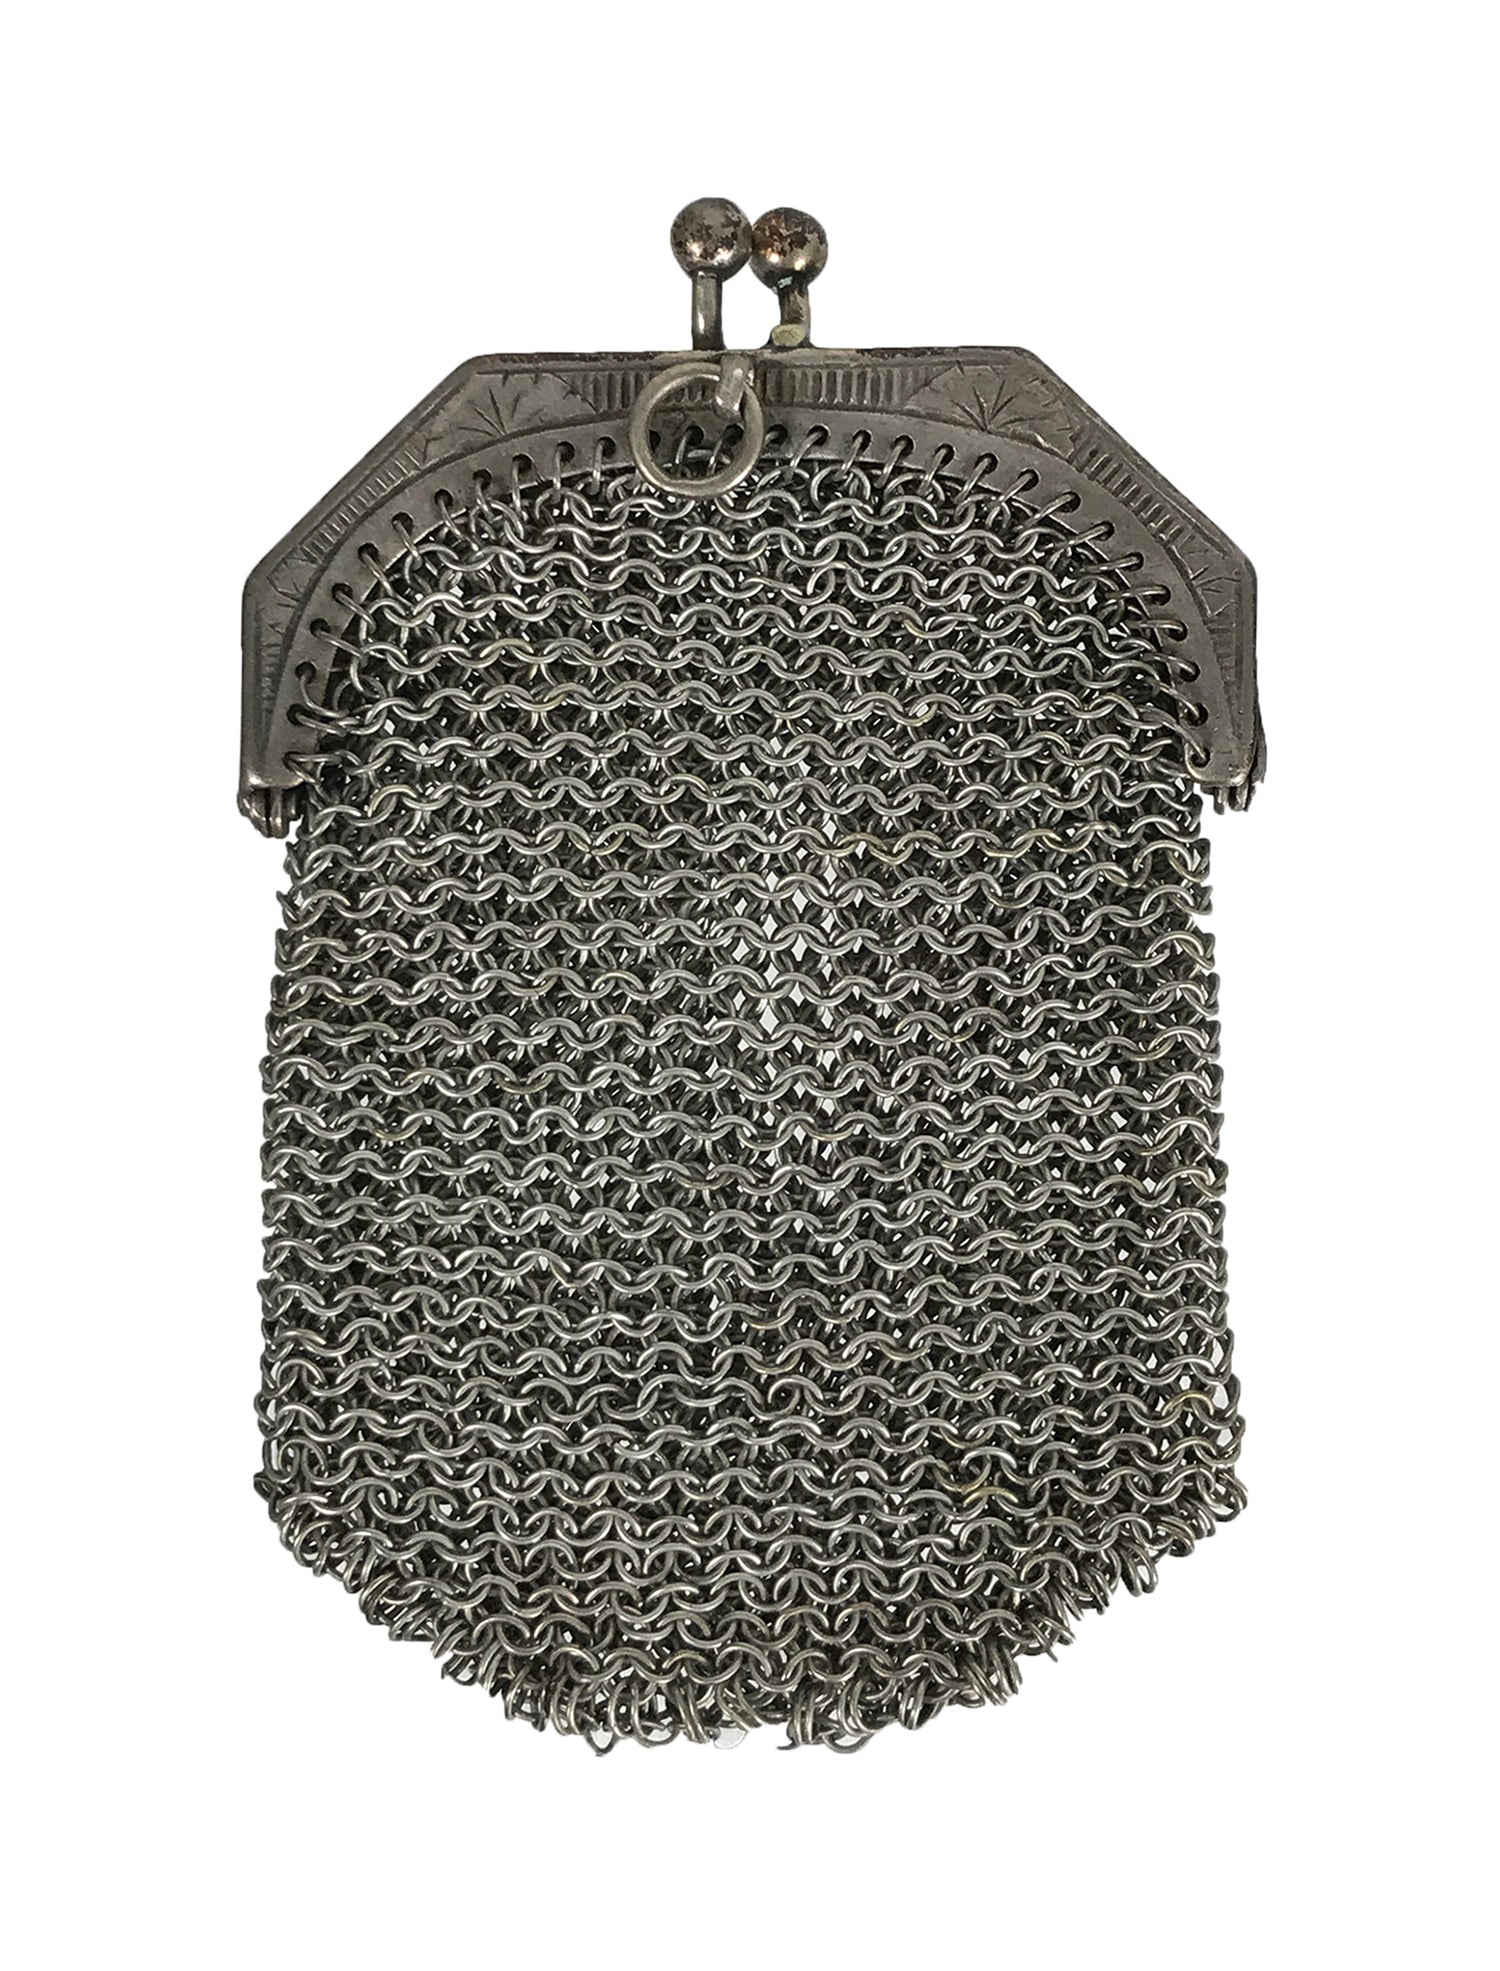 Ladies Coin Purse Chain Mail with Rose Metal Clasp